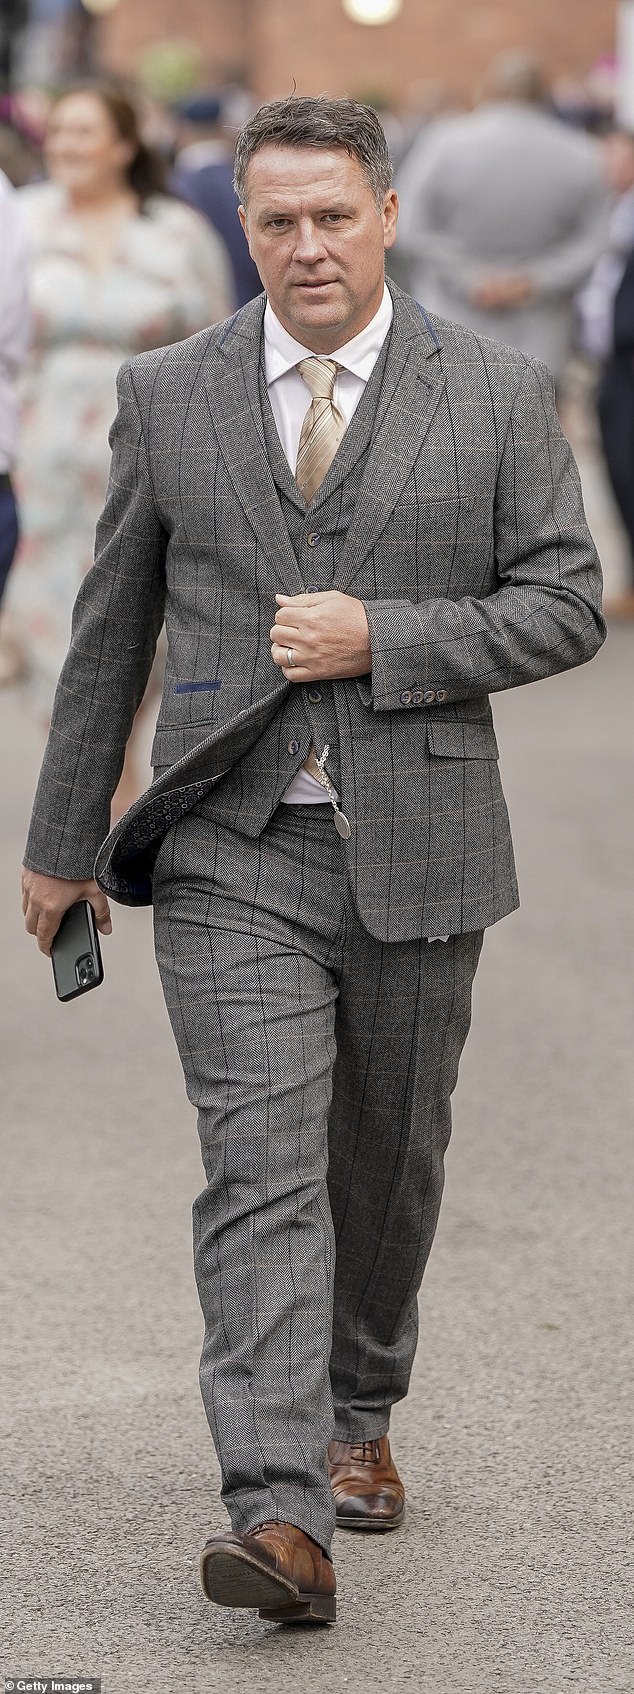 Ex-footballer Michael Owen is pictured looking dapper in a smart grey suit as he arrives at Aintree today